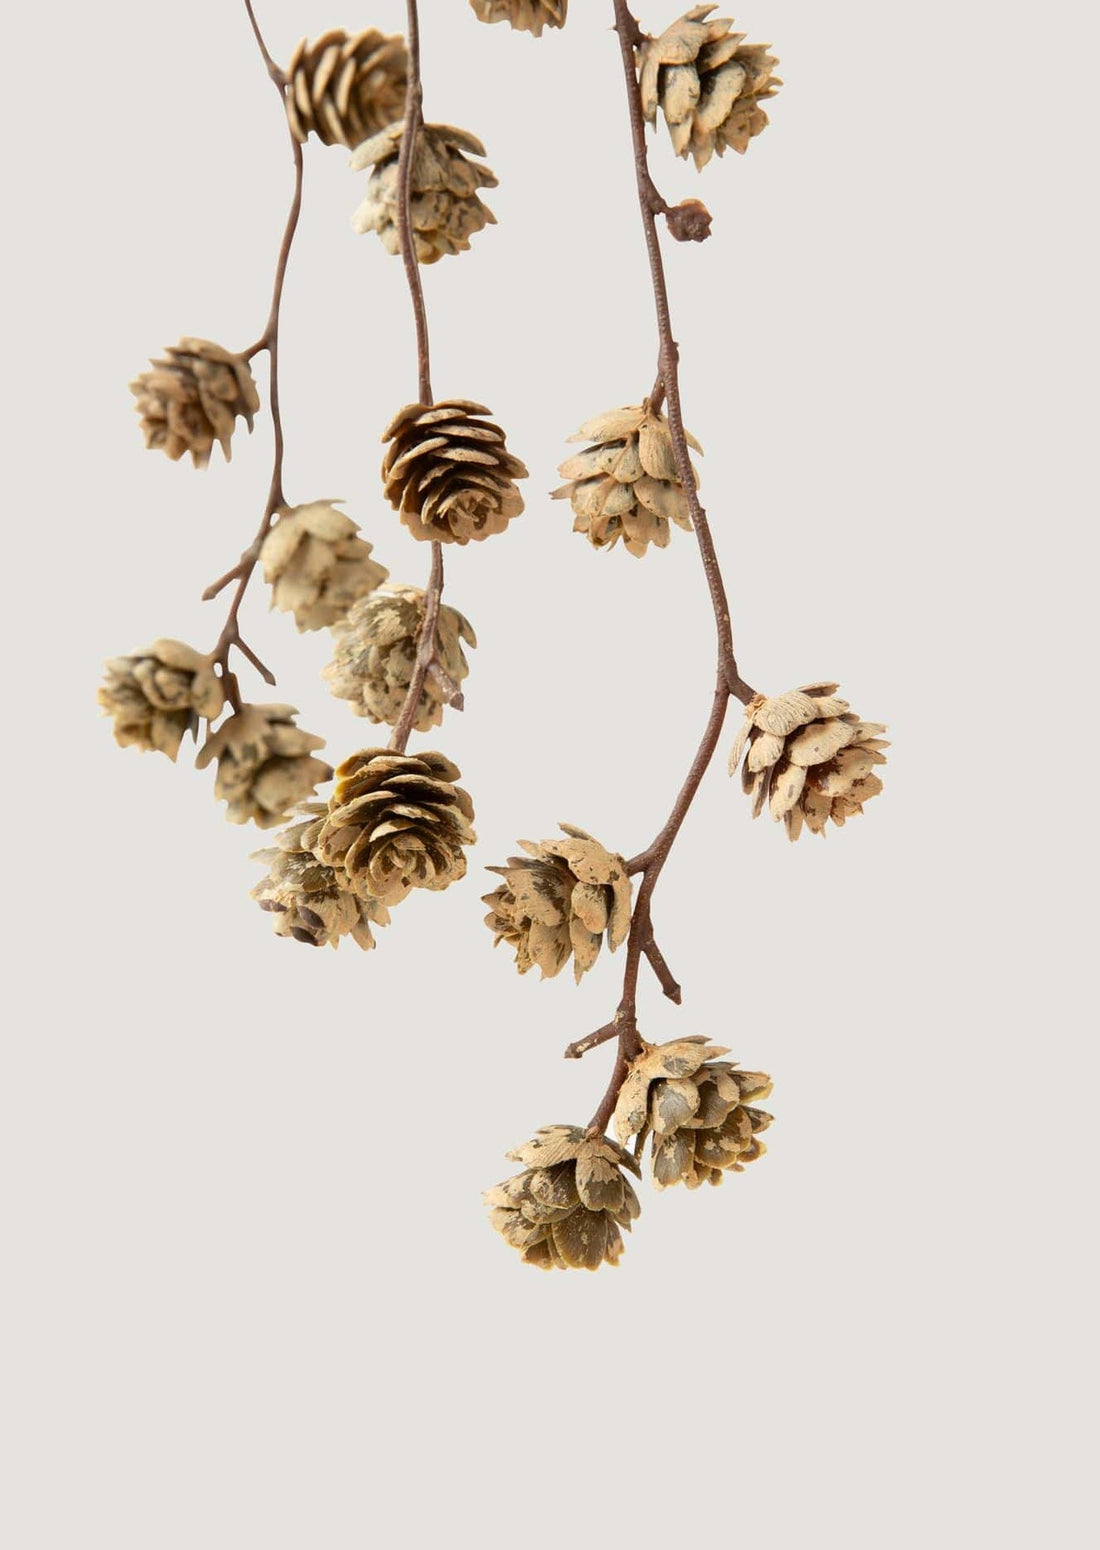 Small Artificial Pine Cones on Hanging Branch